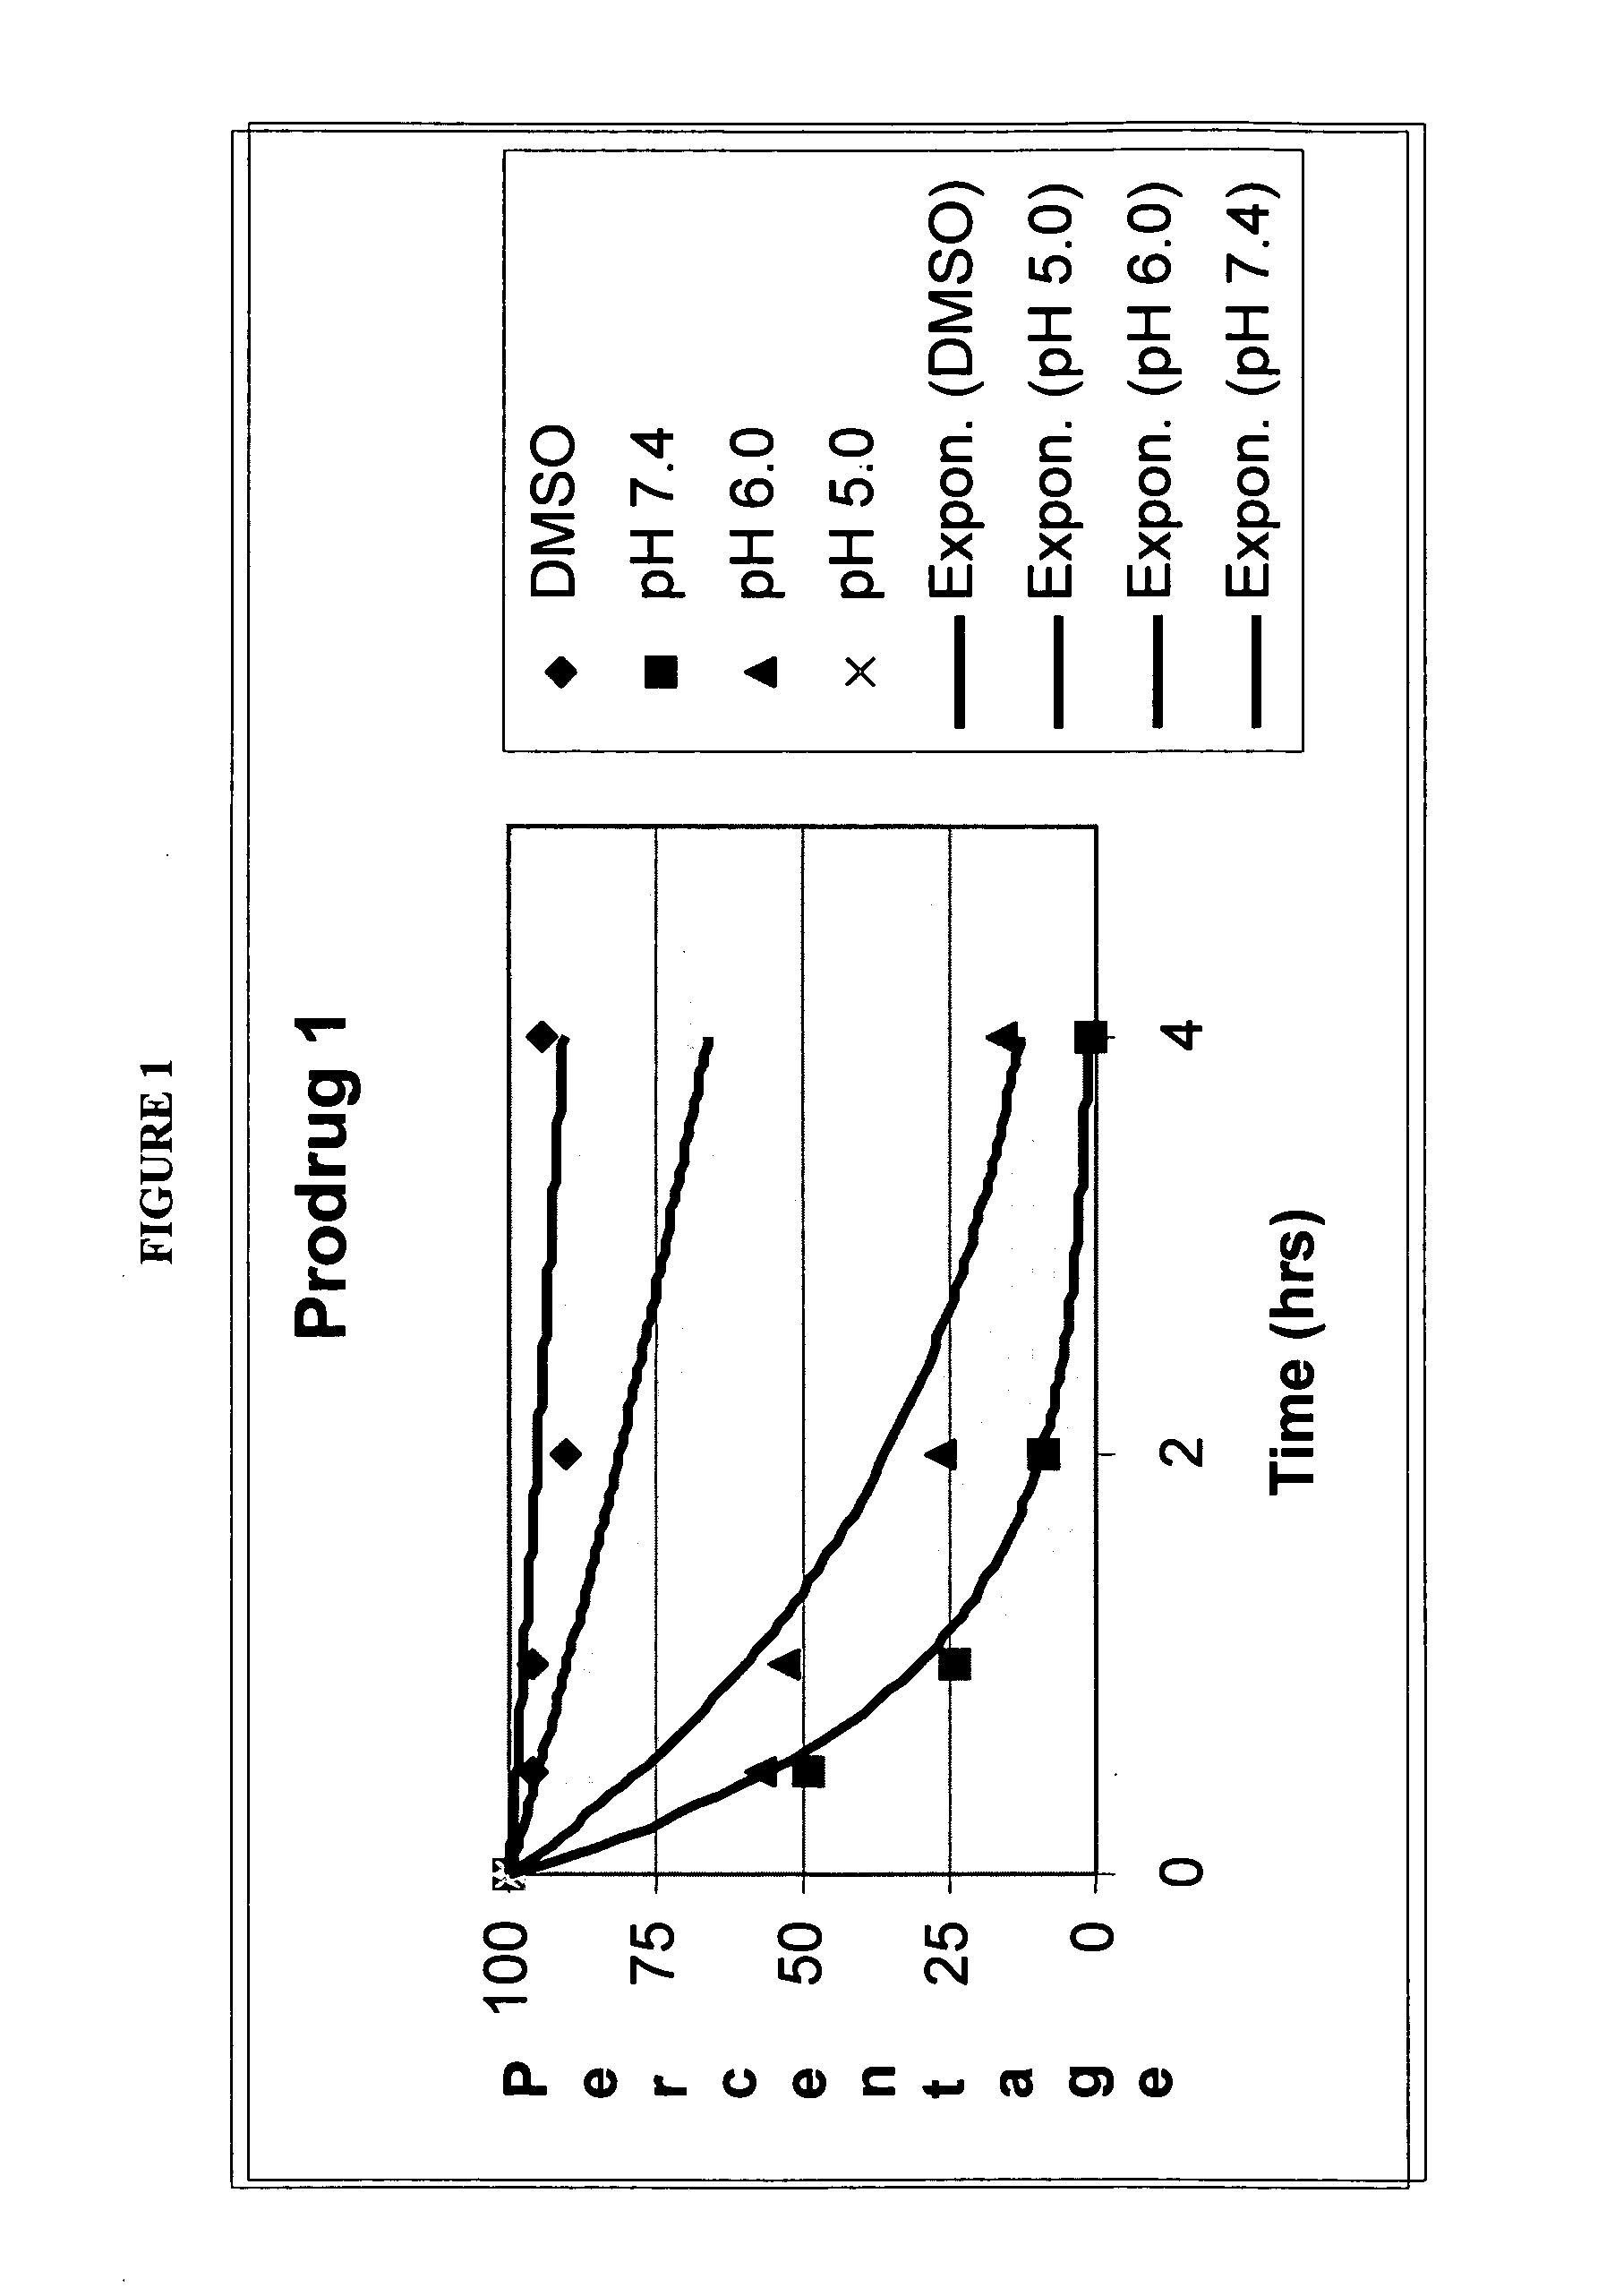 Quinone prodrug compositions and methods of use